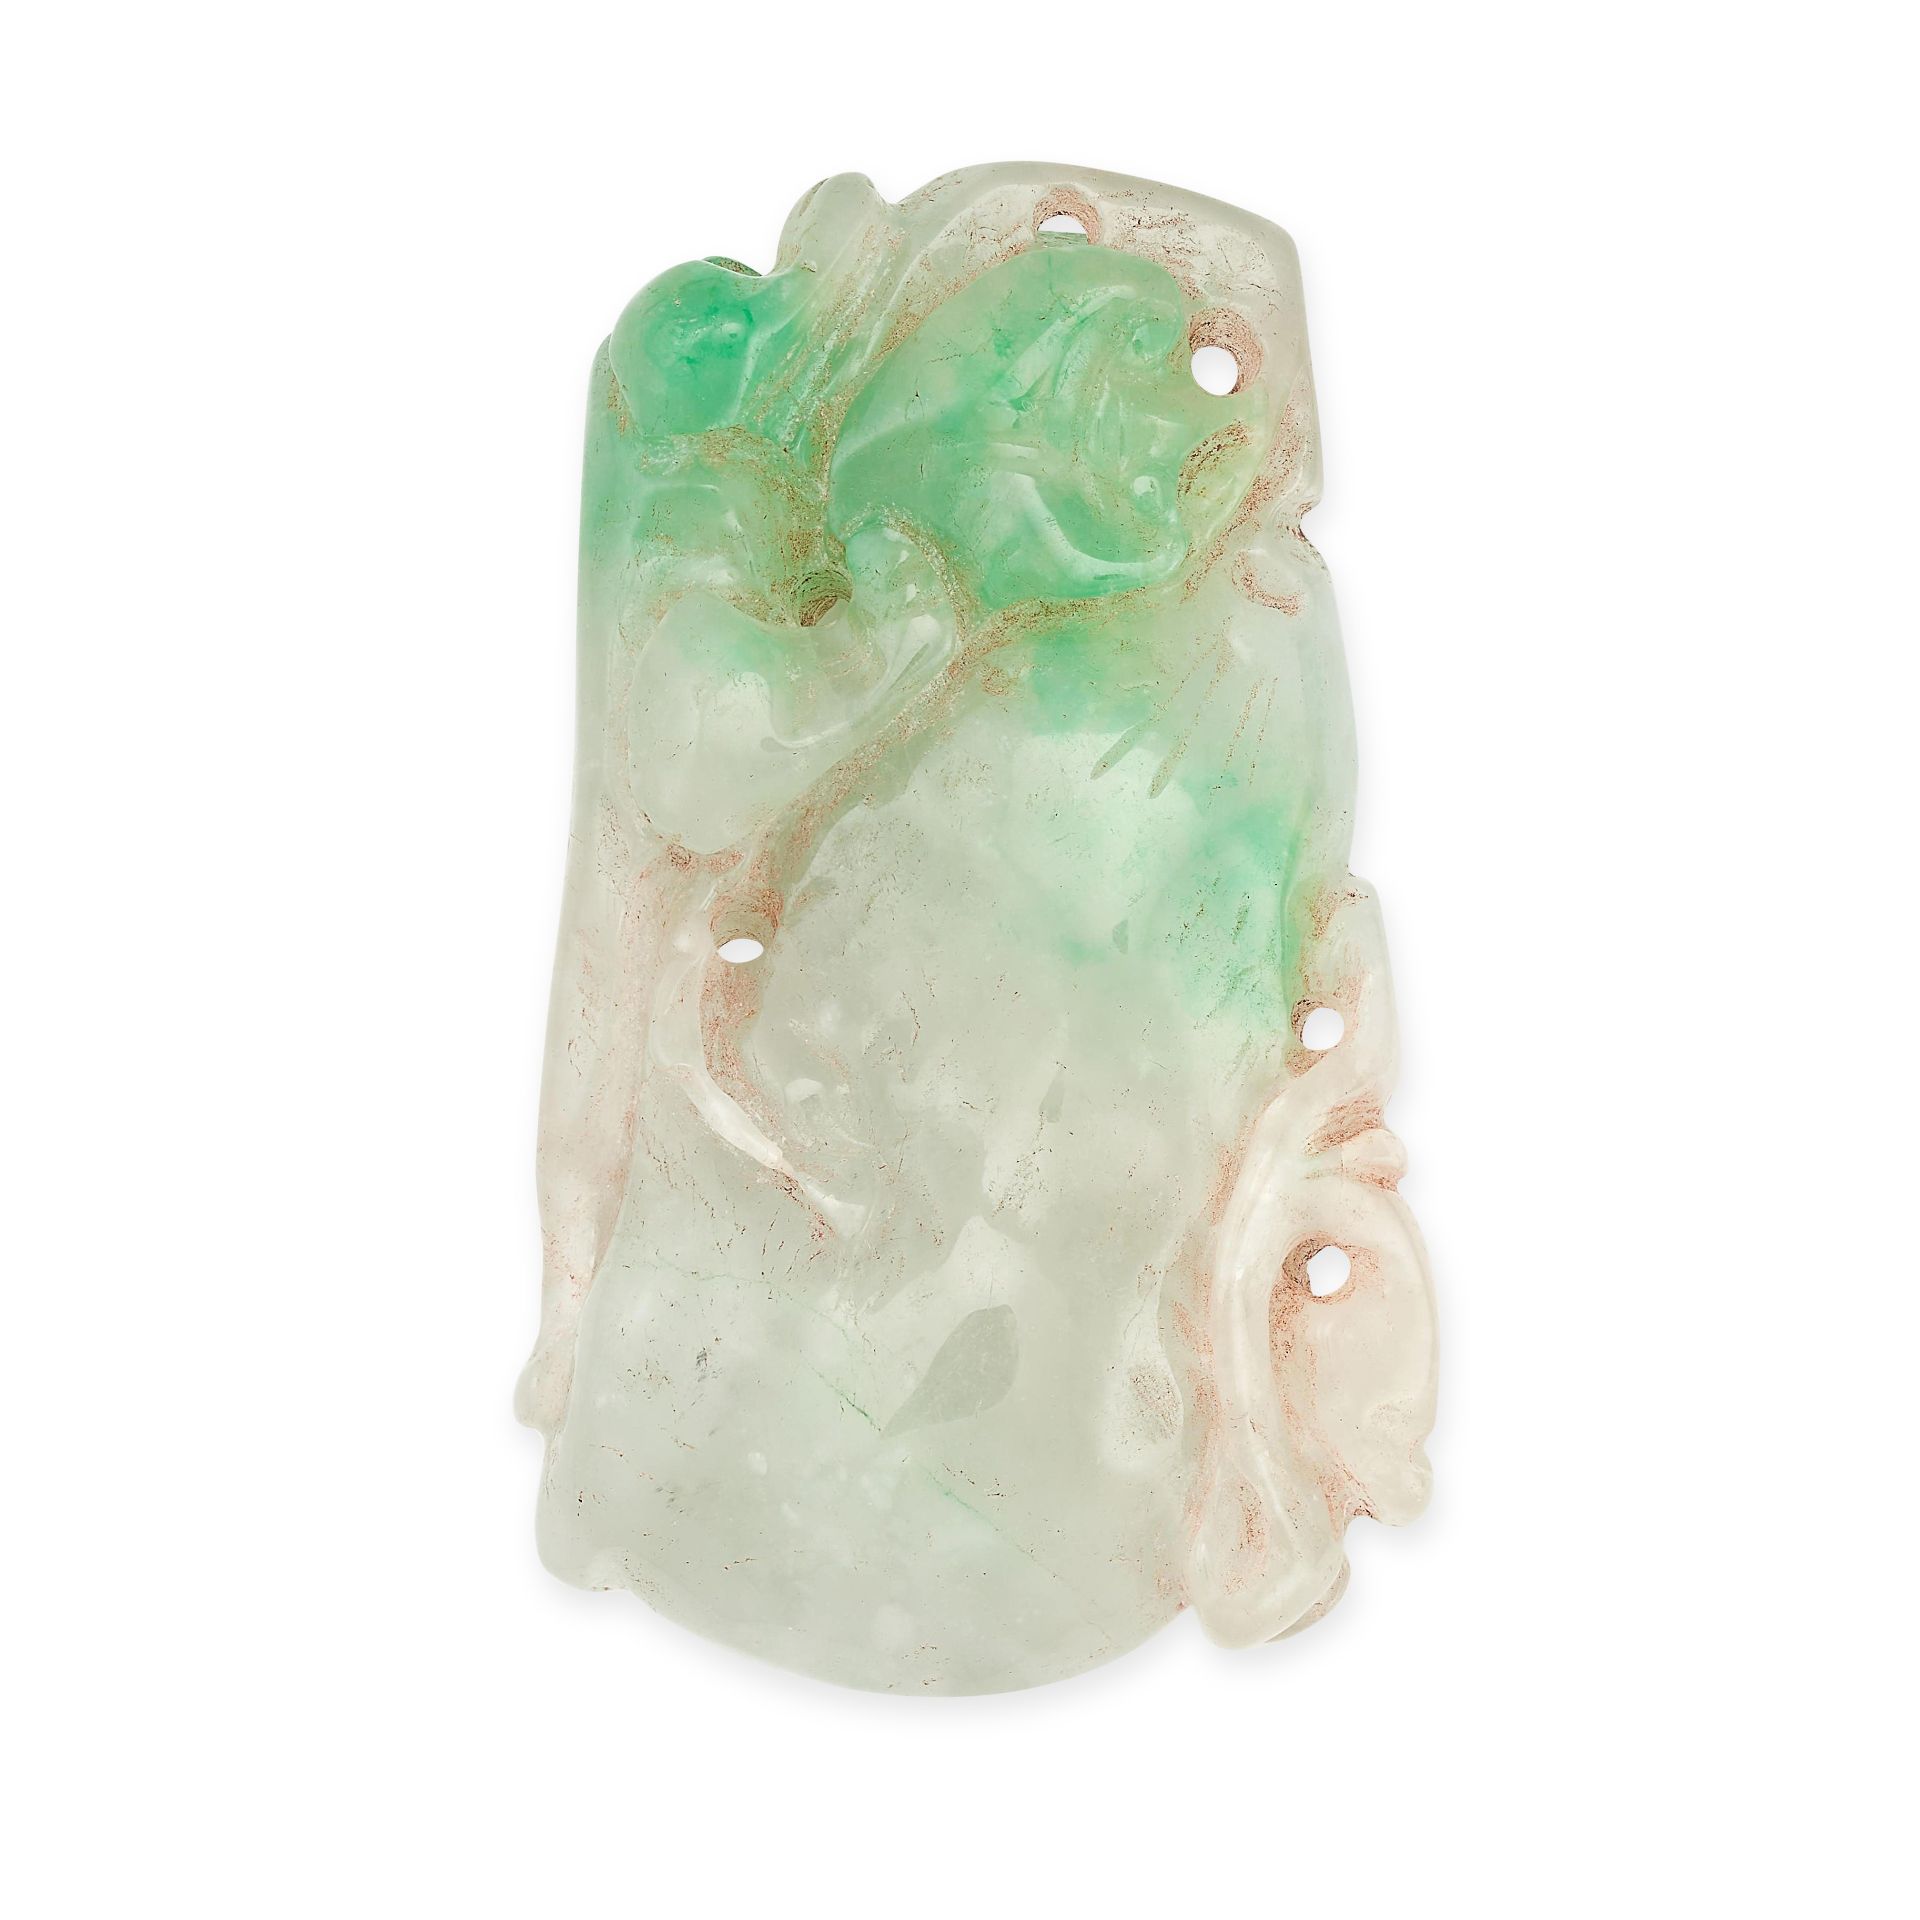 A CARVED JADEITE JADE PLAQUE PENDANT comprising a single piece of polished jade, carved in the